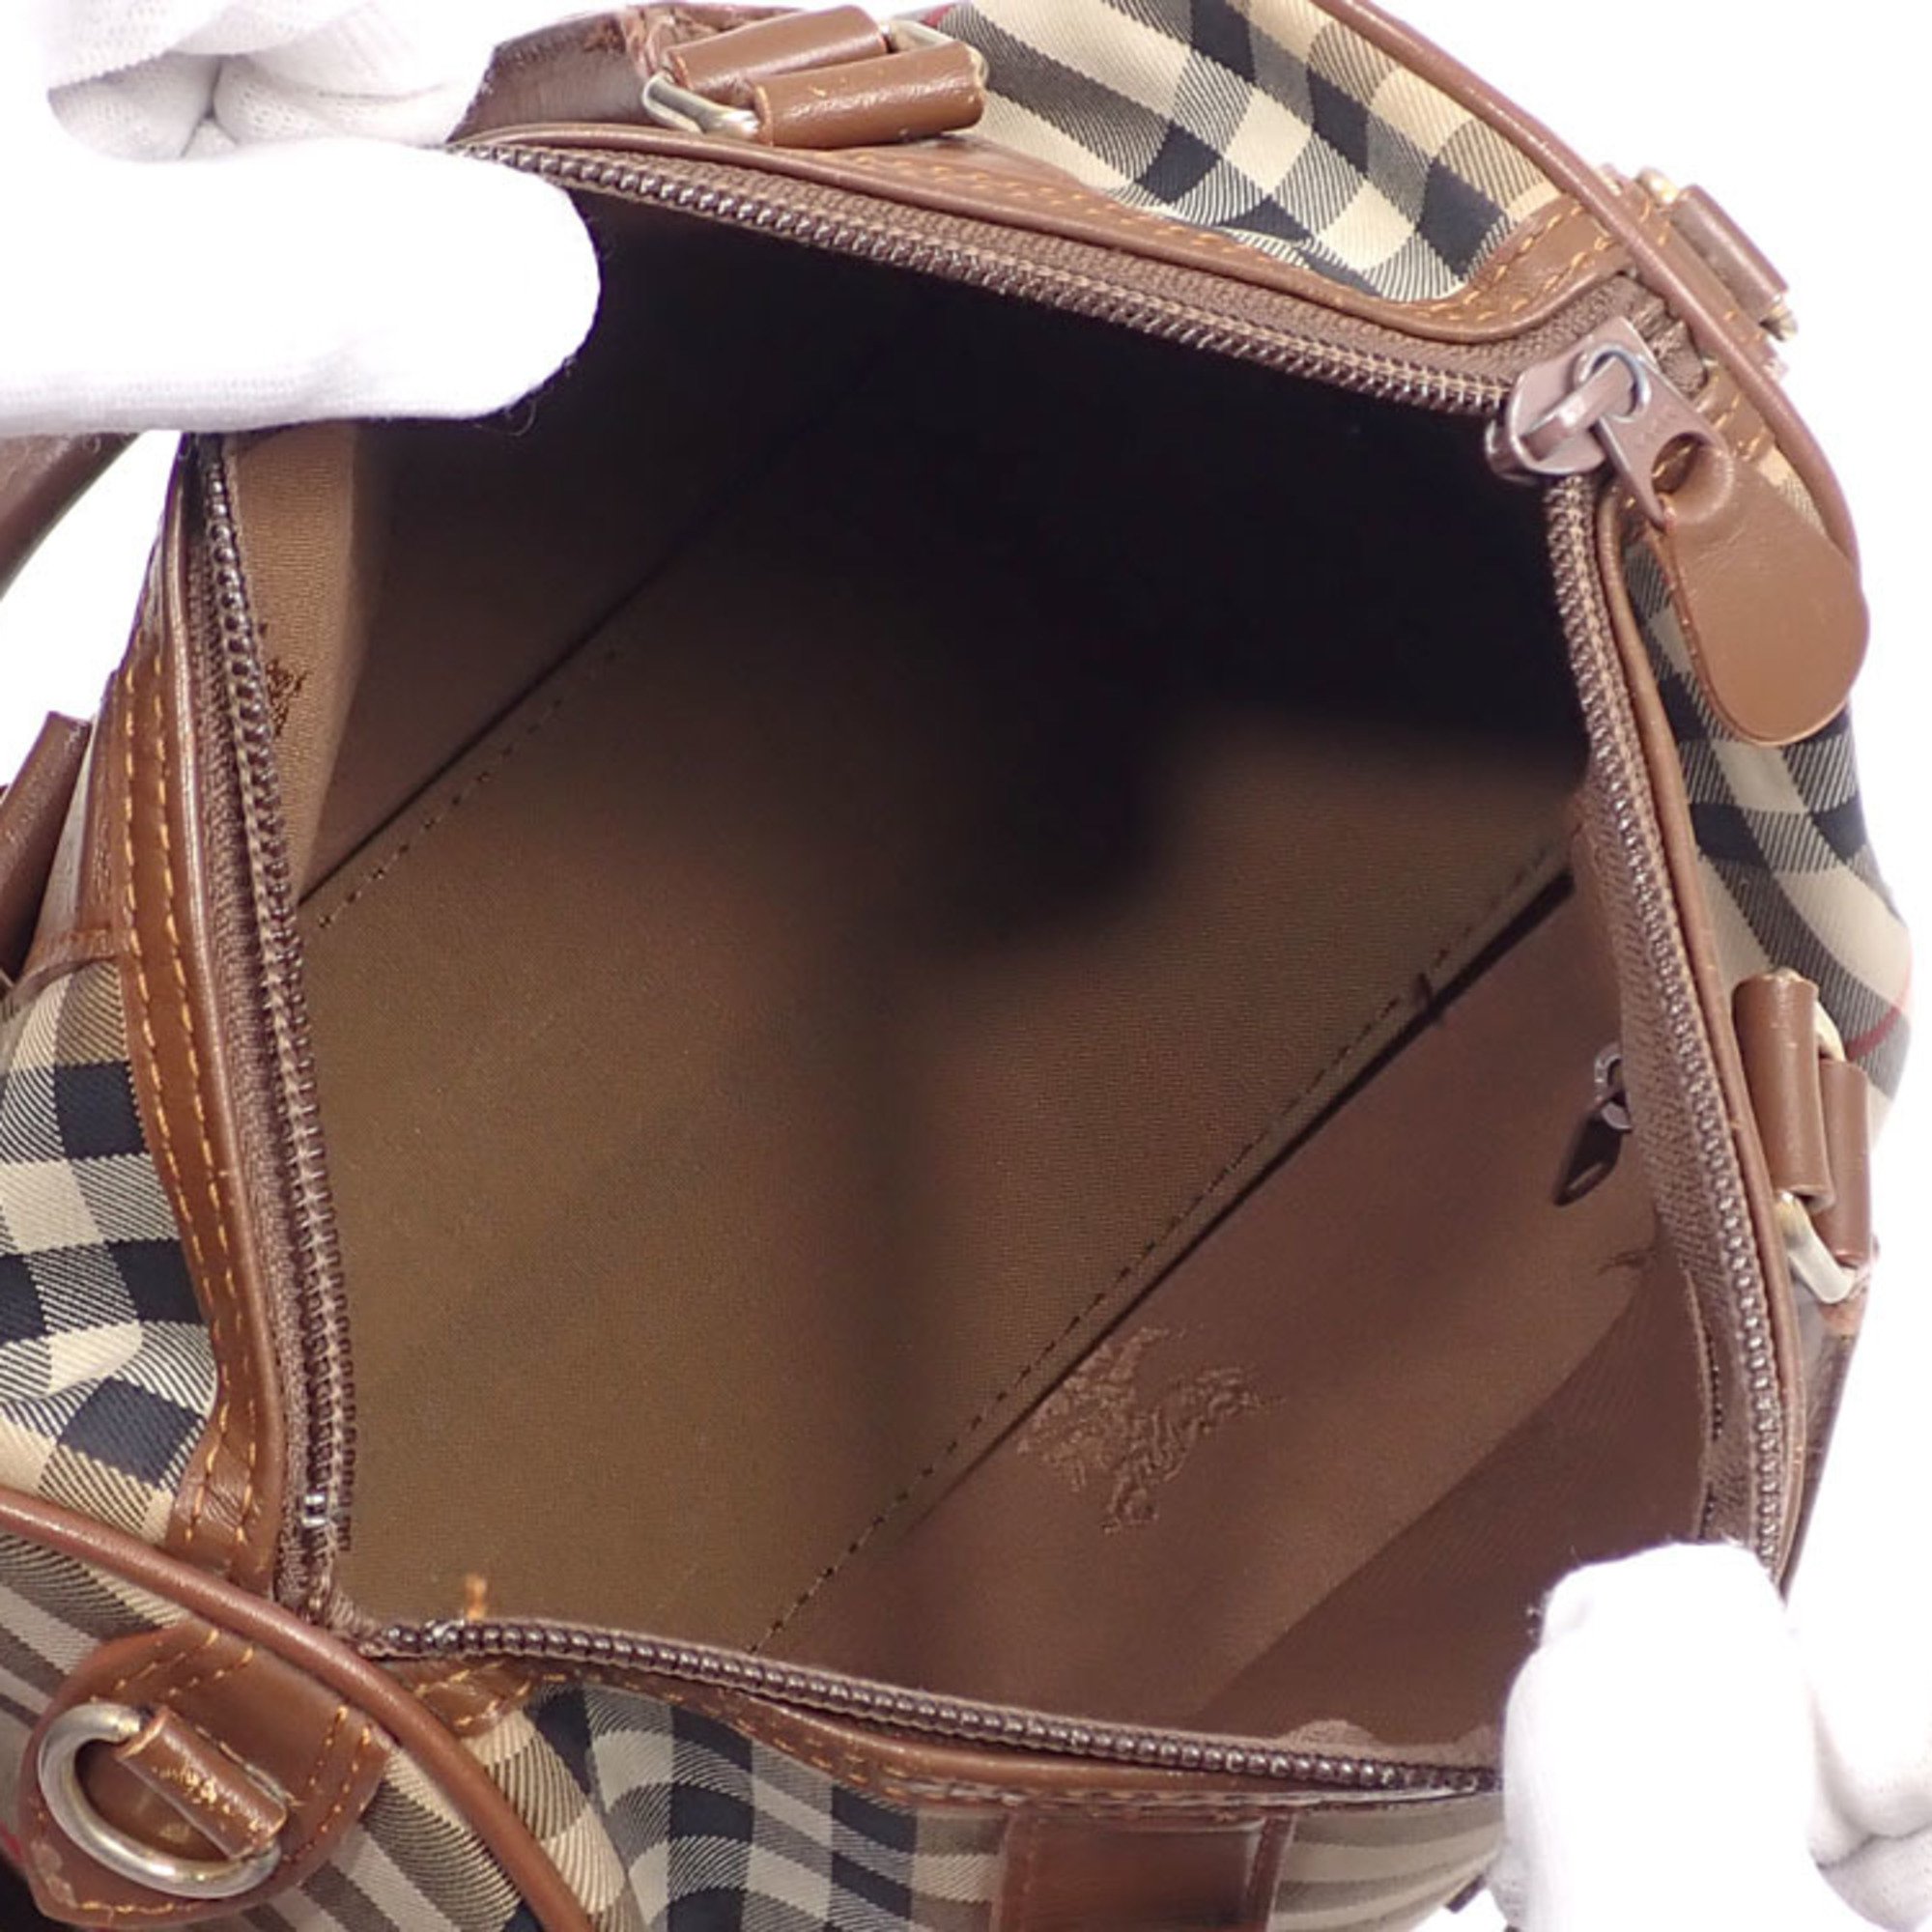 Burberry's Boston Bag Women's Brown Beige Canvas Leather Hand Plaid Pattern A6047067